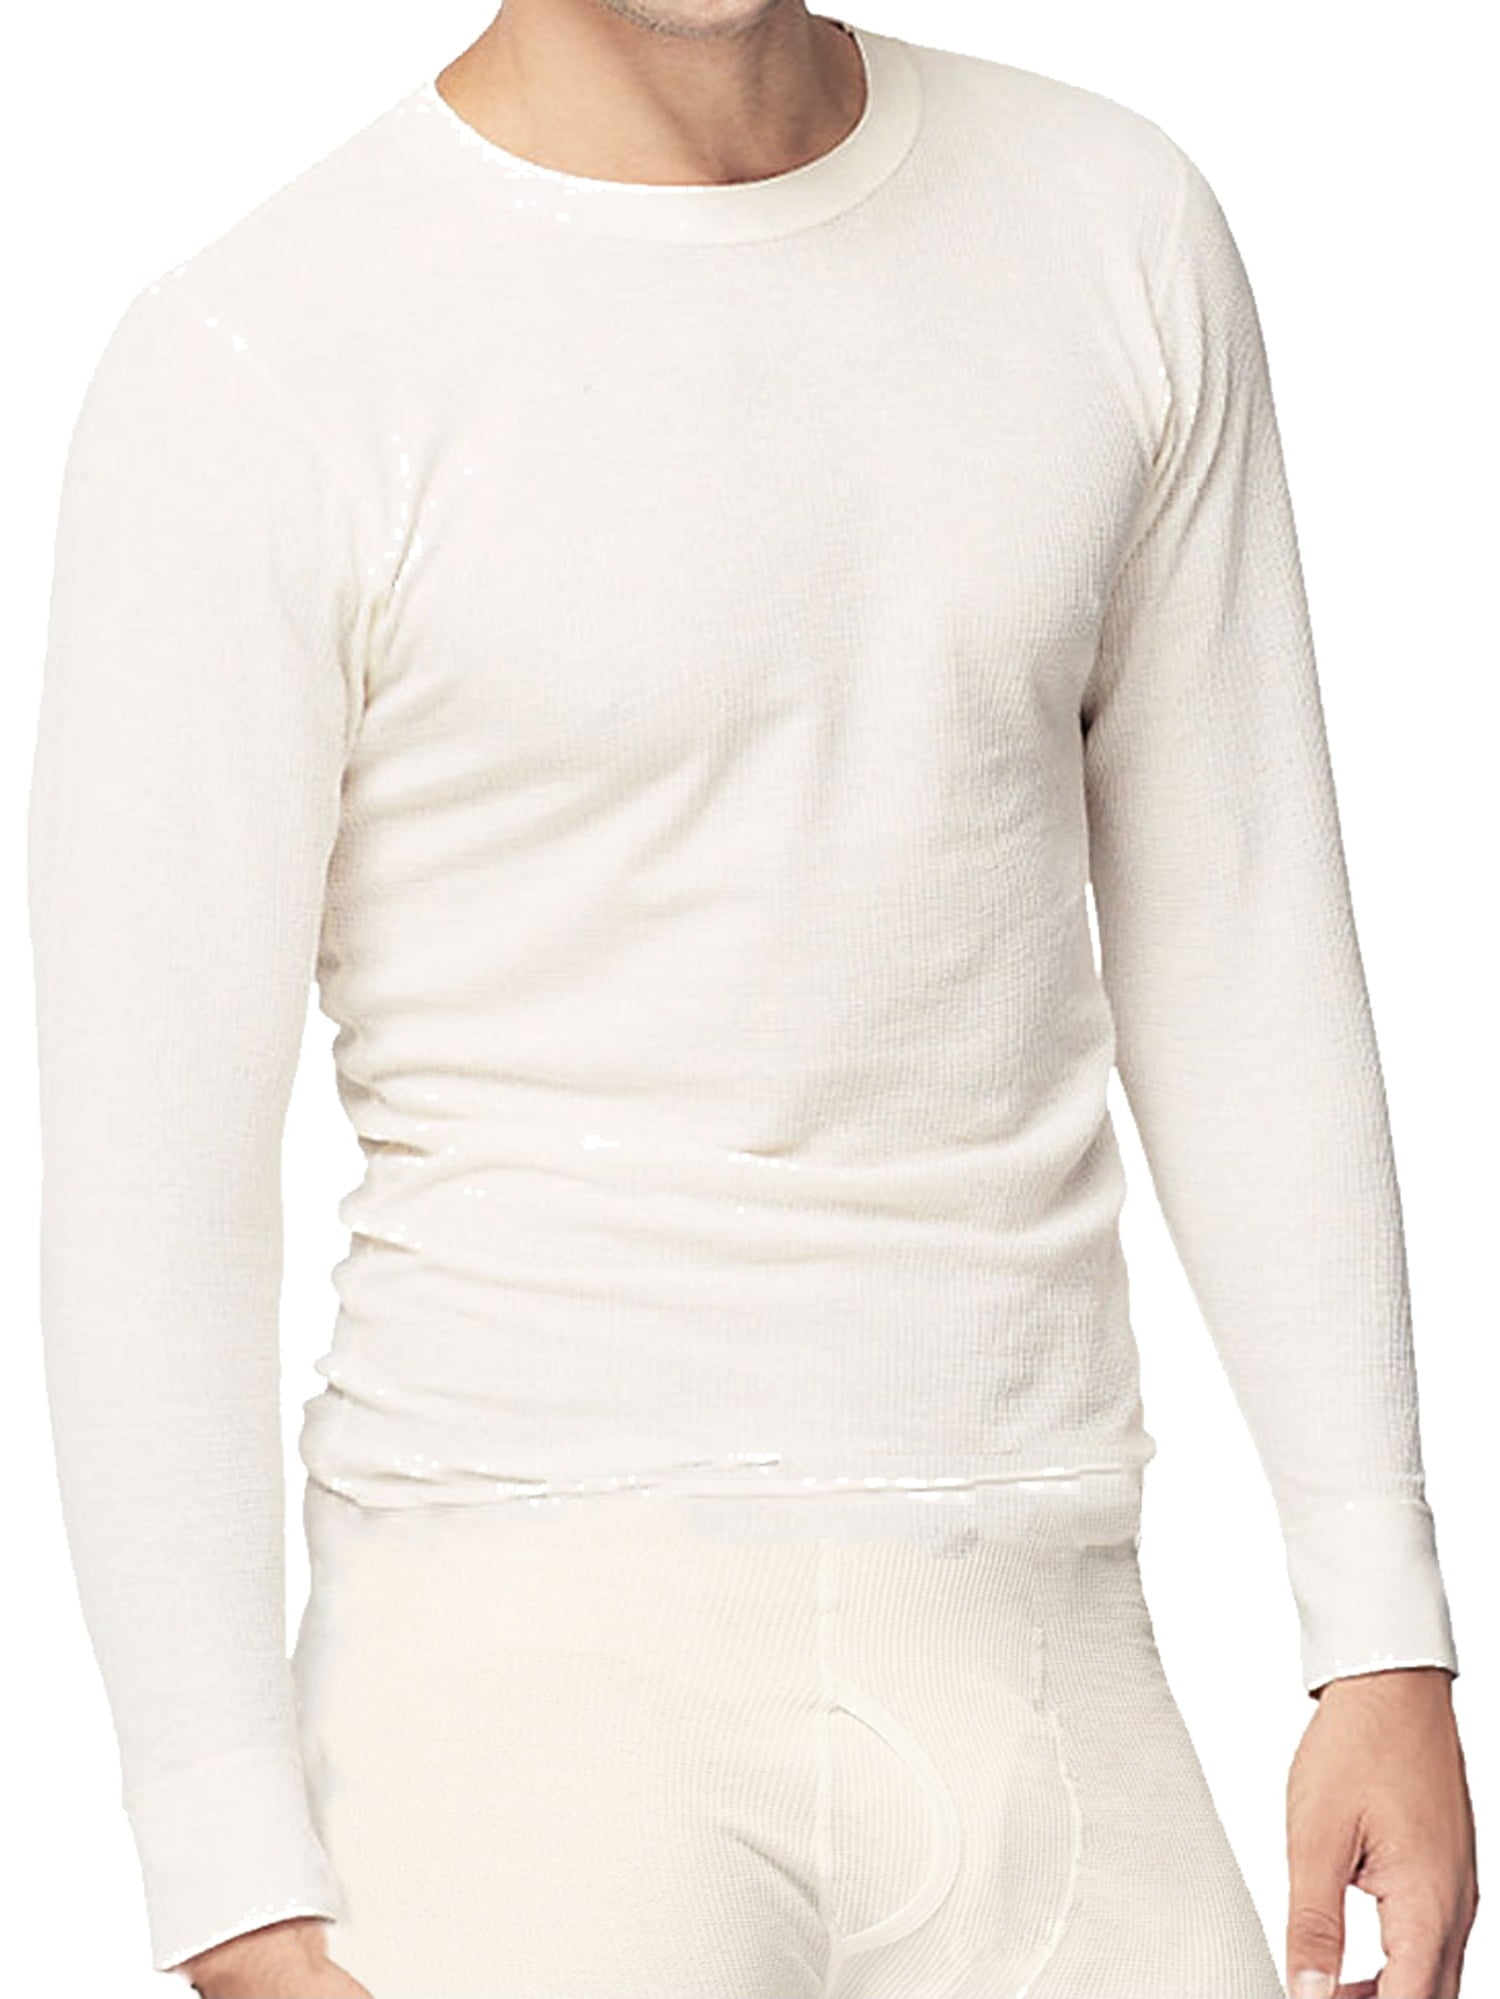 Stanfield's Men's Mid-Rise Waffle Knit Long Johns at Tractor